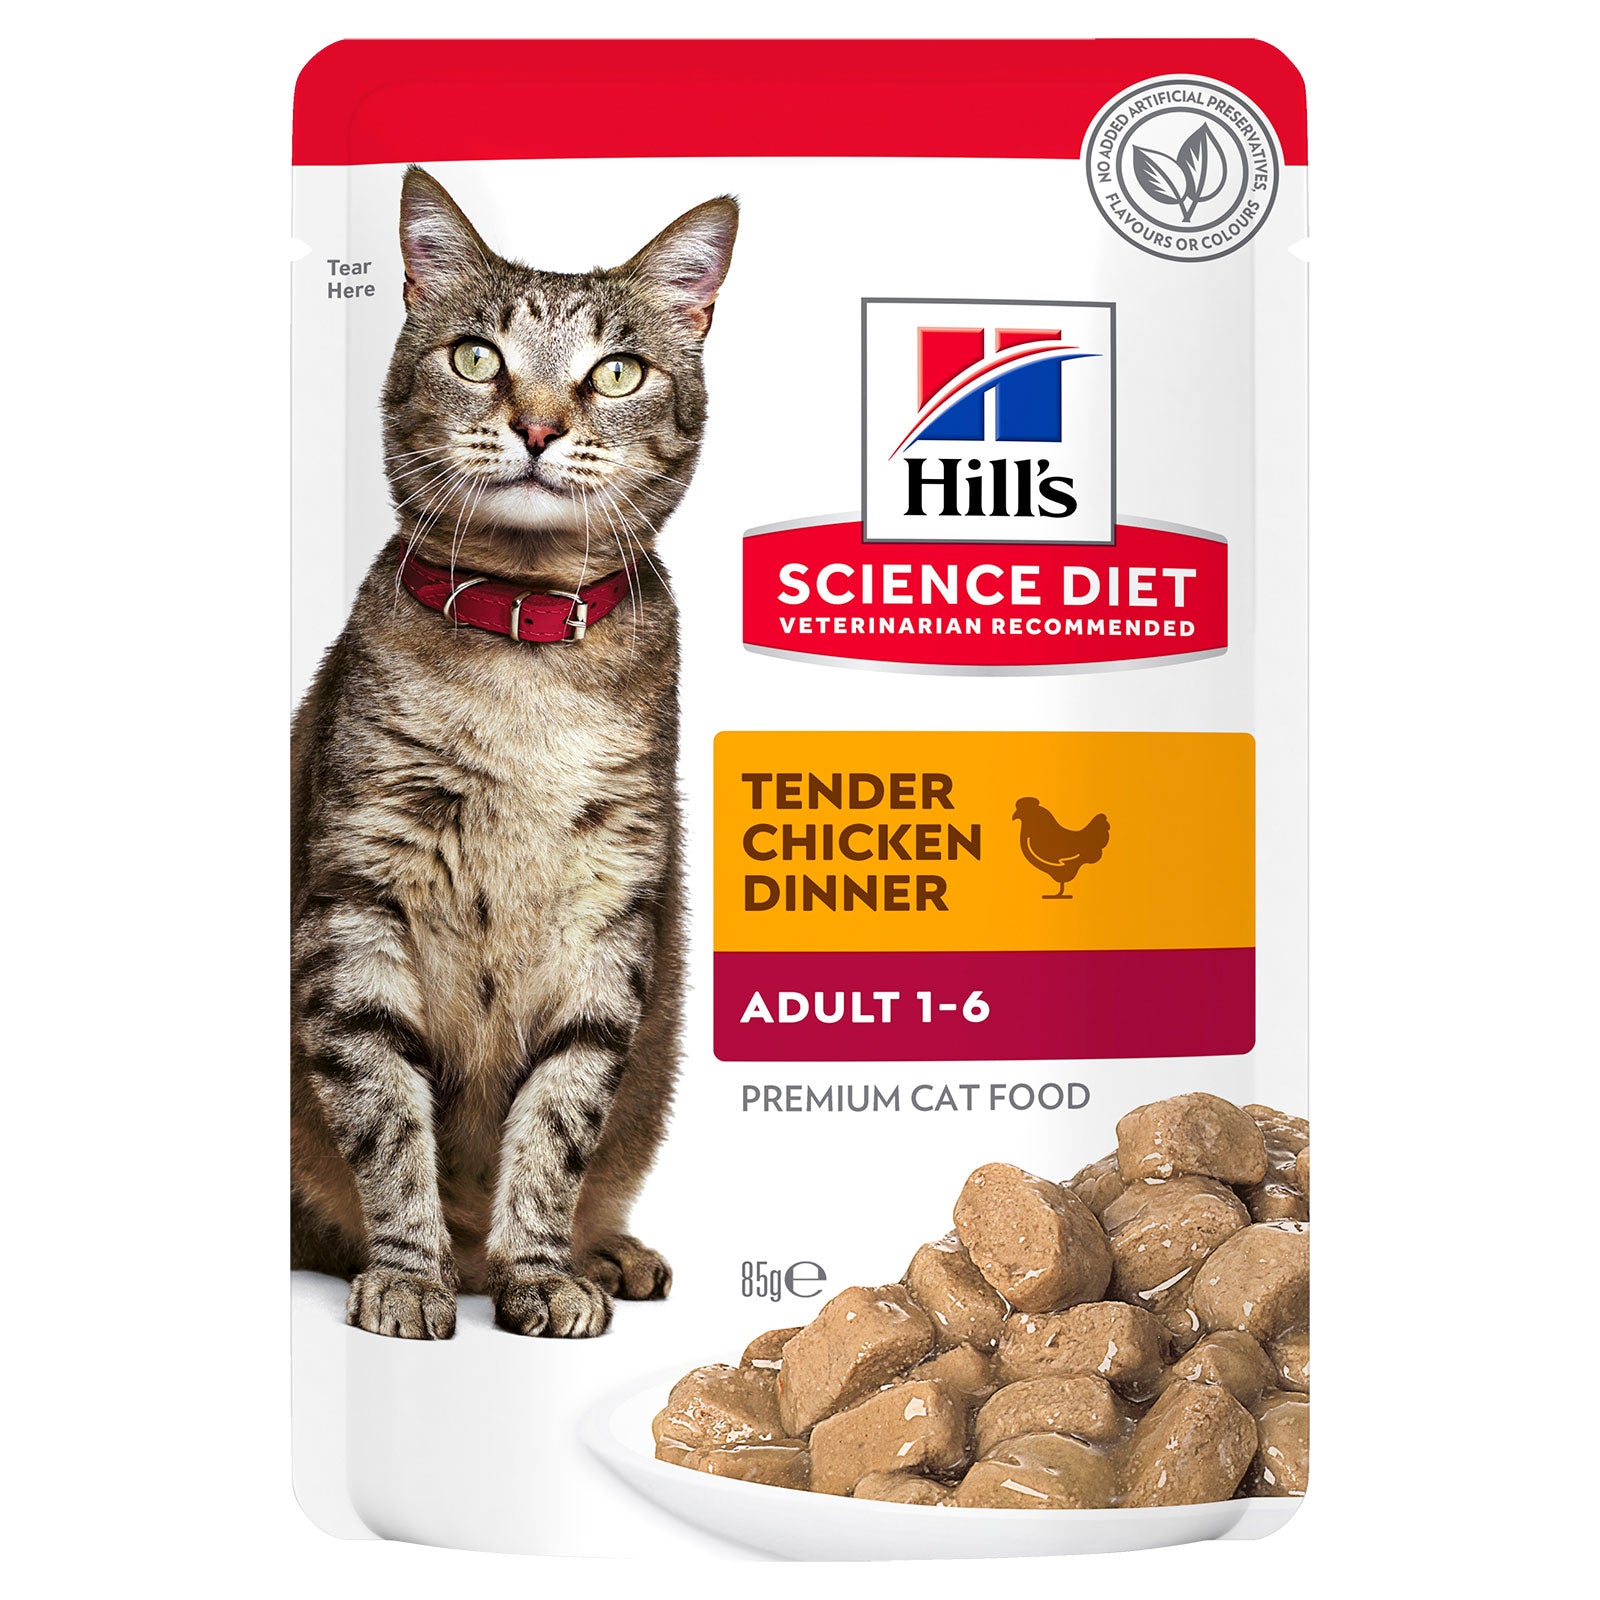 Hill's Science Diet Cat Food Pouch Adult Chicken